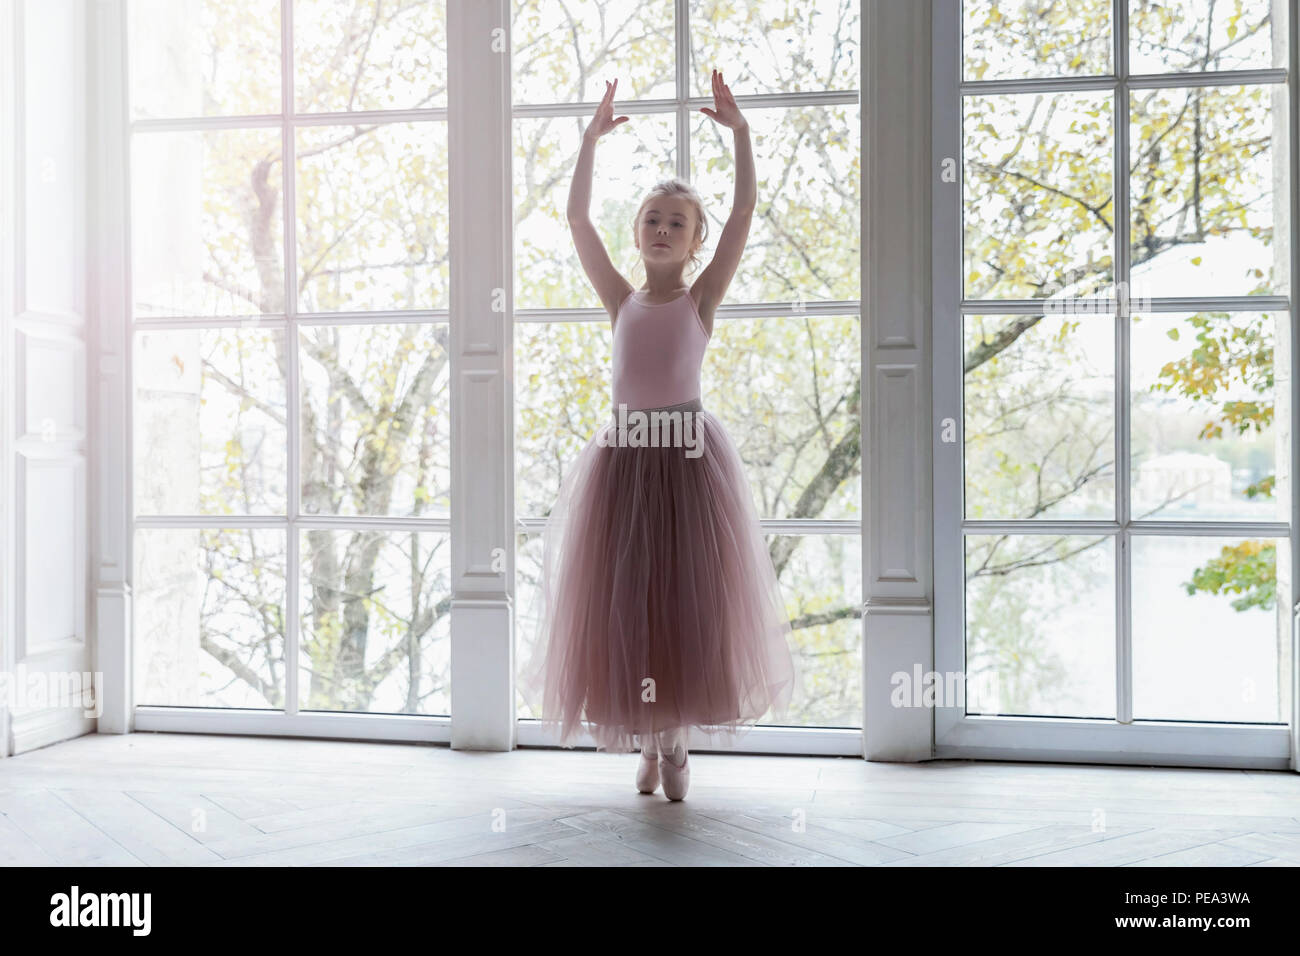 Young ballerina in a pink ballet tutu training in dance class